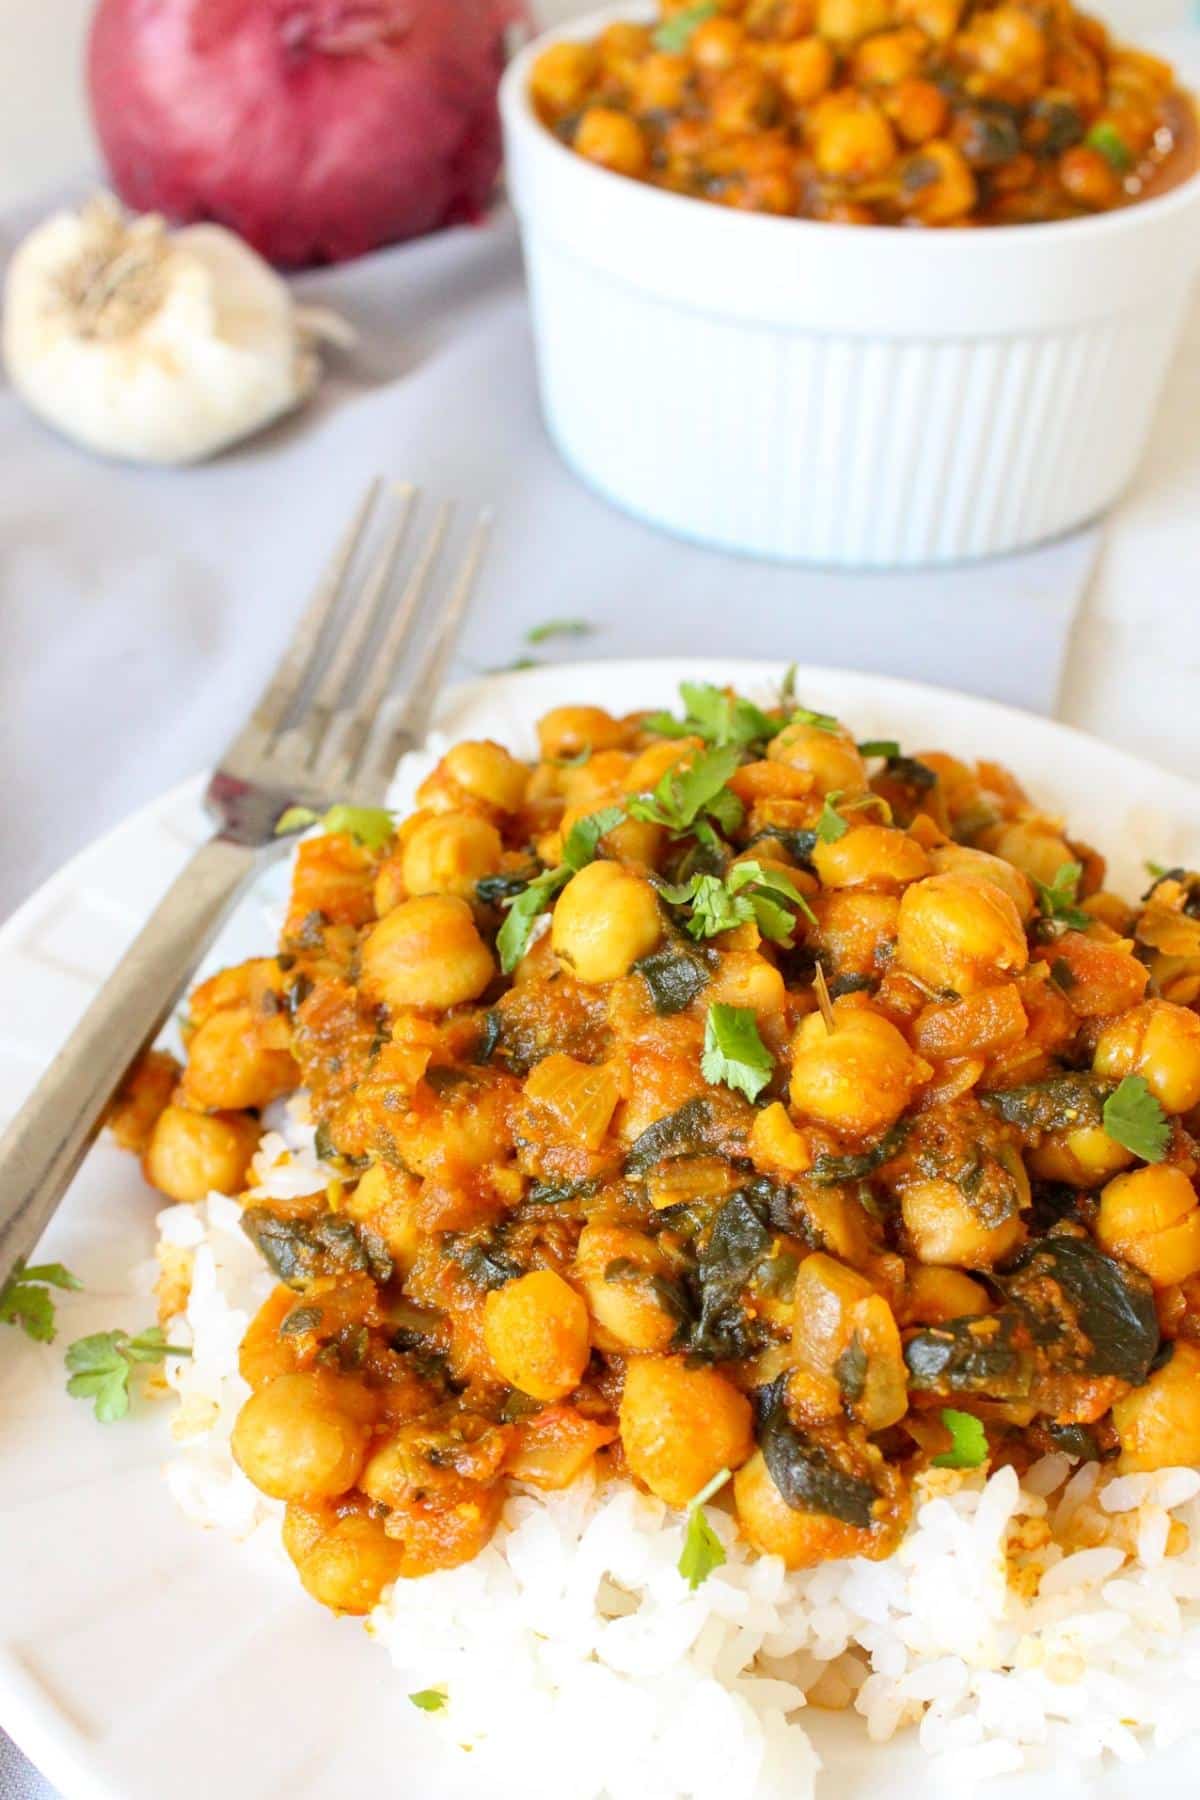 Spinach and chickpea curry on a plate with rice